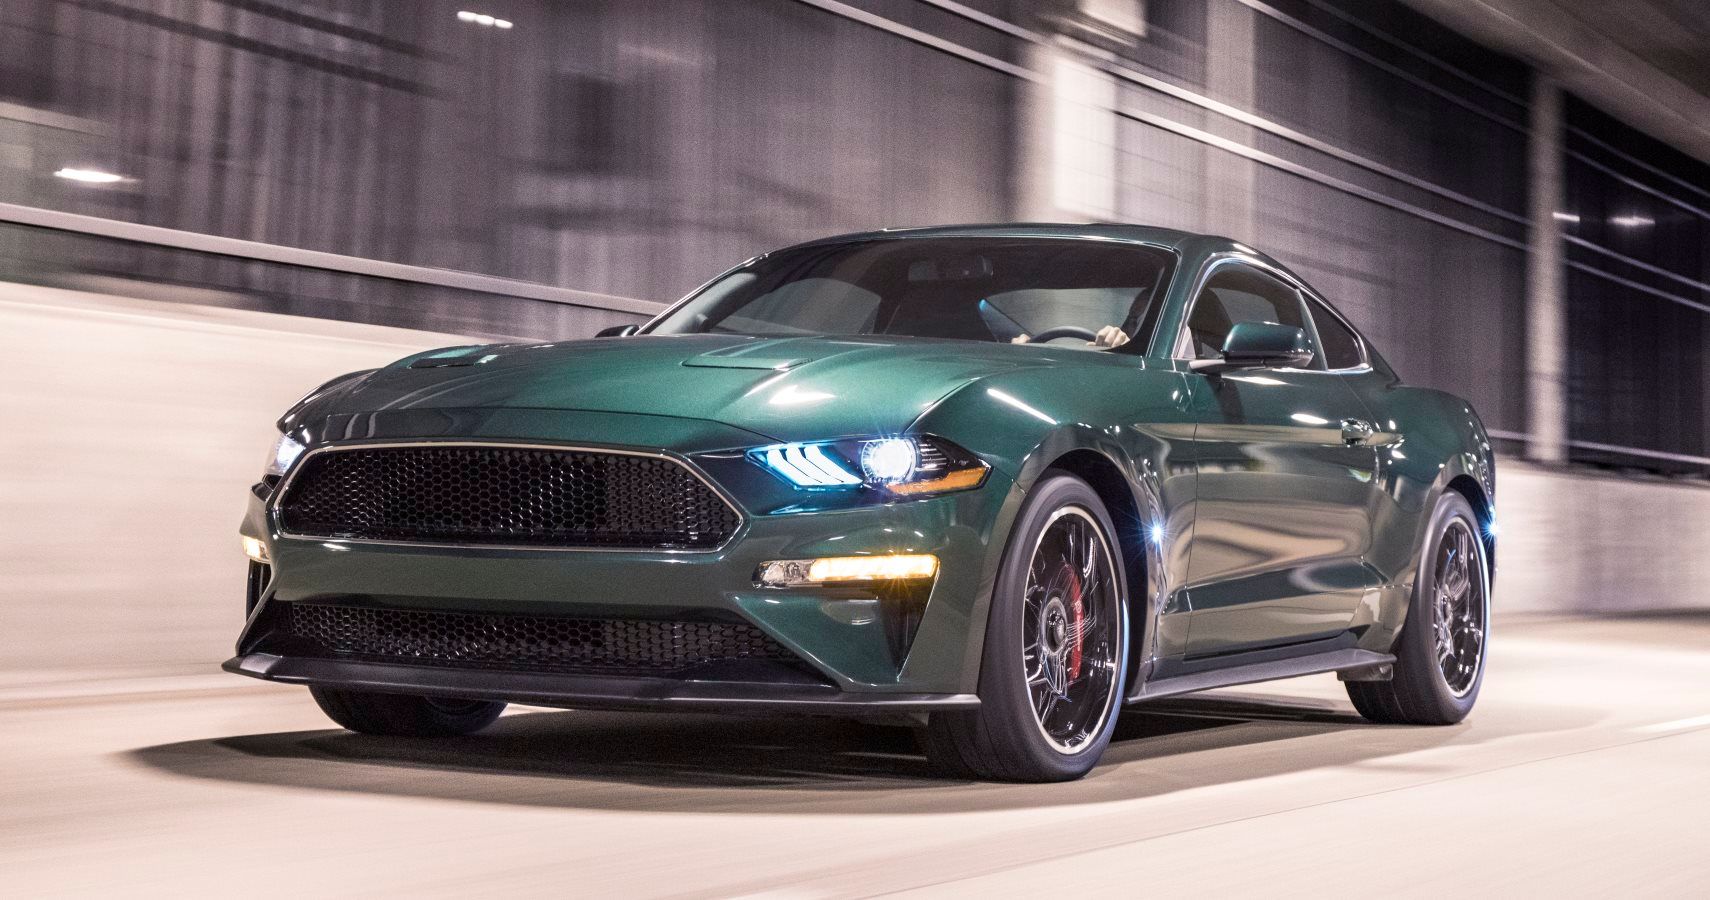 Celebrating the 50th anniversary of iconic movie “Bullitt” and its fan-favorite San Francisco car chase, Ford introduces the new cool and powerful 2019 Mustang Bullitt.